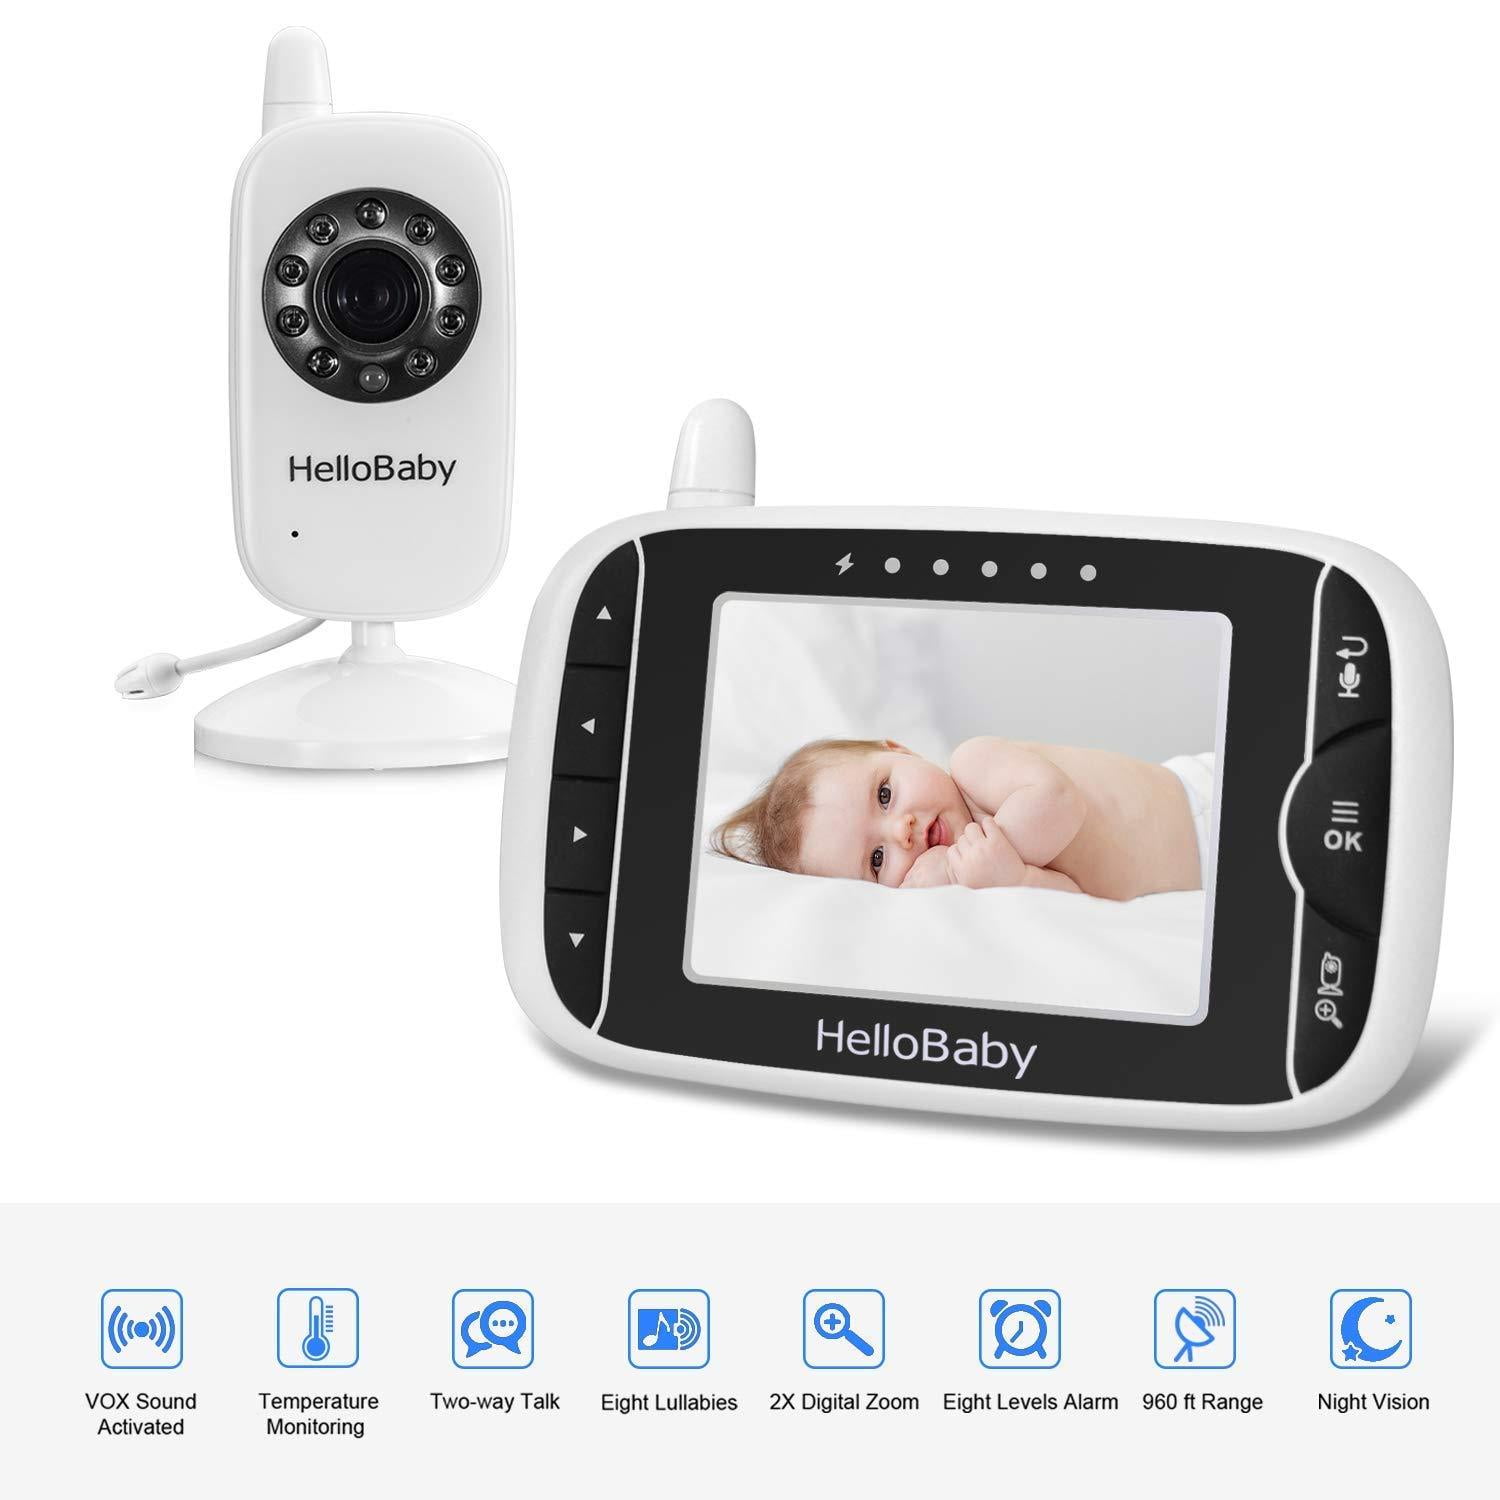  HelloBaby Video Baby Monitor with Remote Camera Pan-Tilt-Zoom,  3.2'' Color LCD Screen, Infrared Night Vision, Temperature Display,  Lullaby, Two Way Audio : Baby